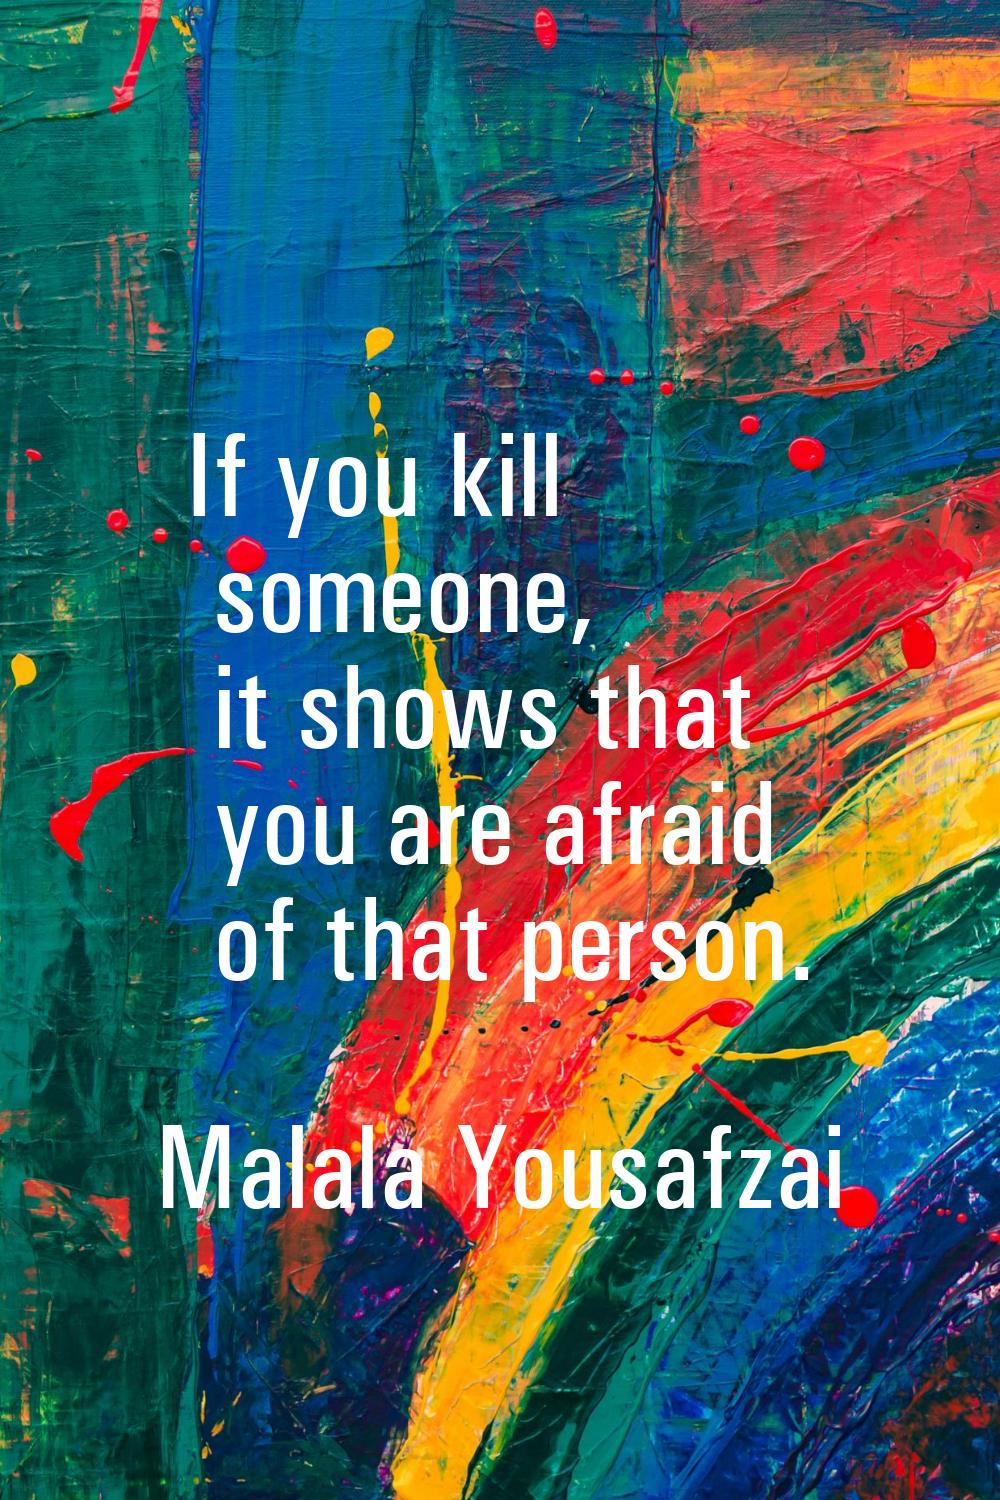 If you kill someone, it shows that you are afraid of that person.